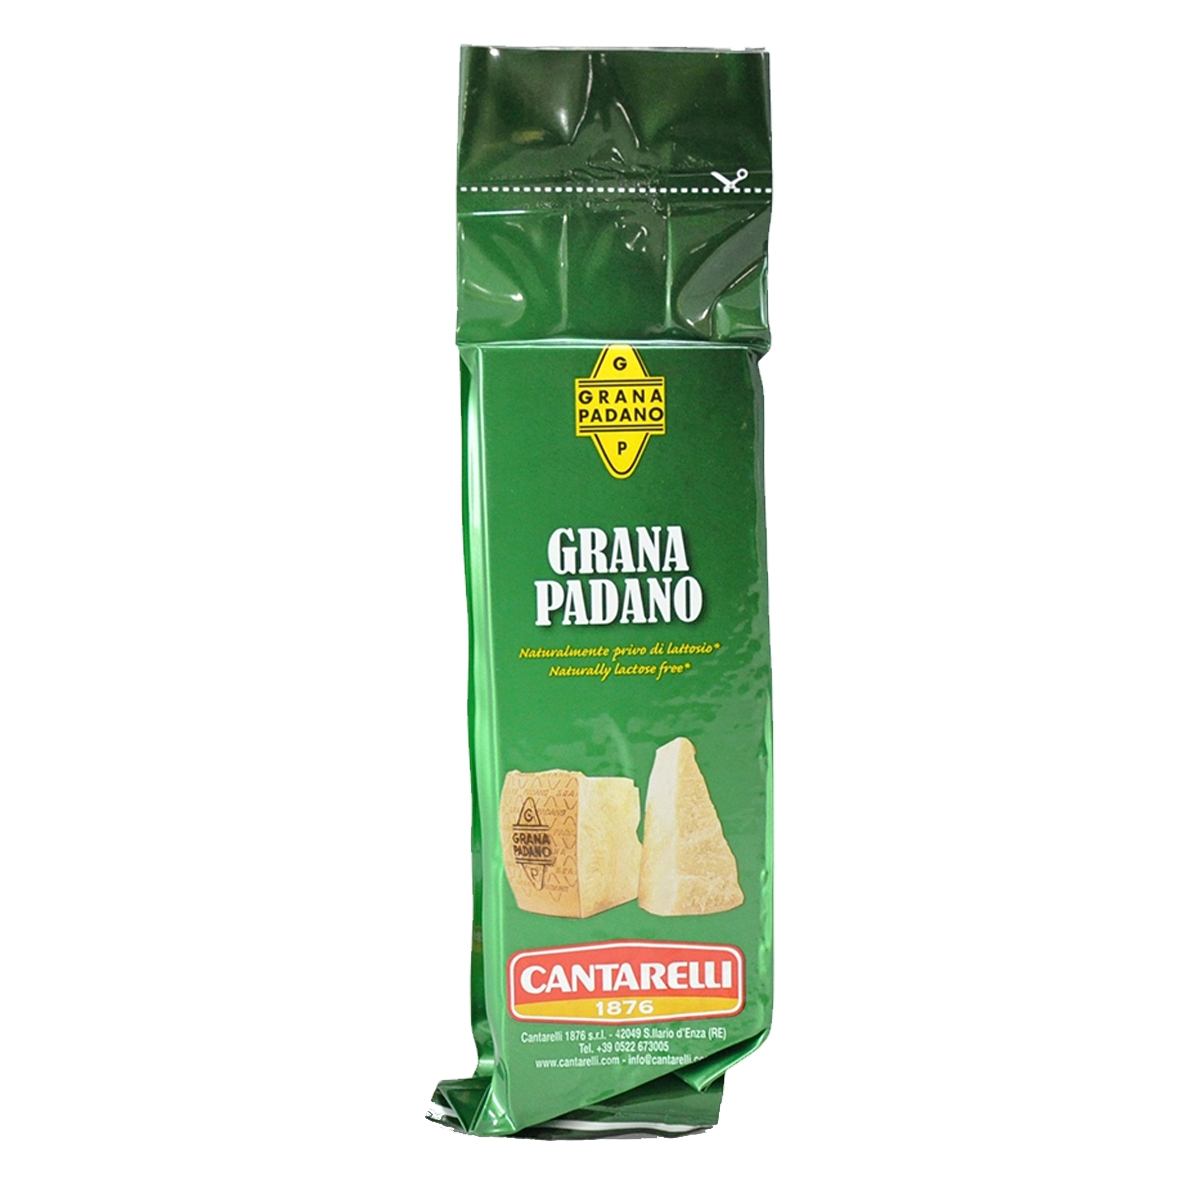 grana padano dop - naturally matured for over 16 months - 1 kg